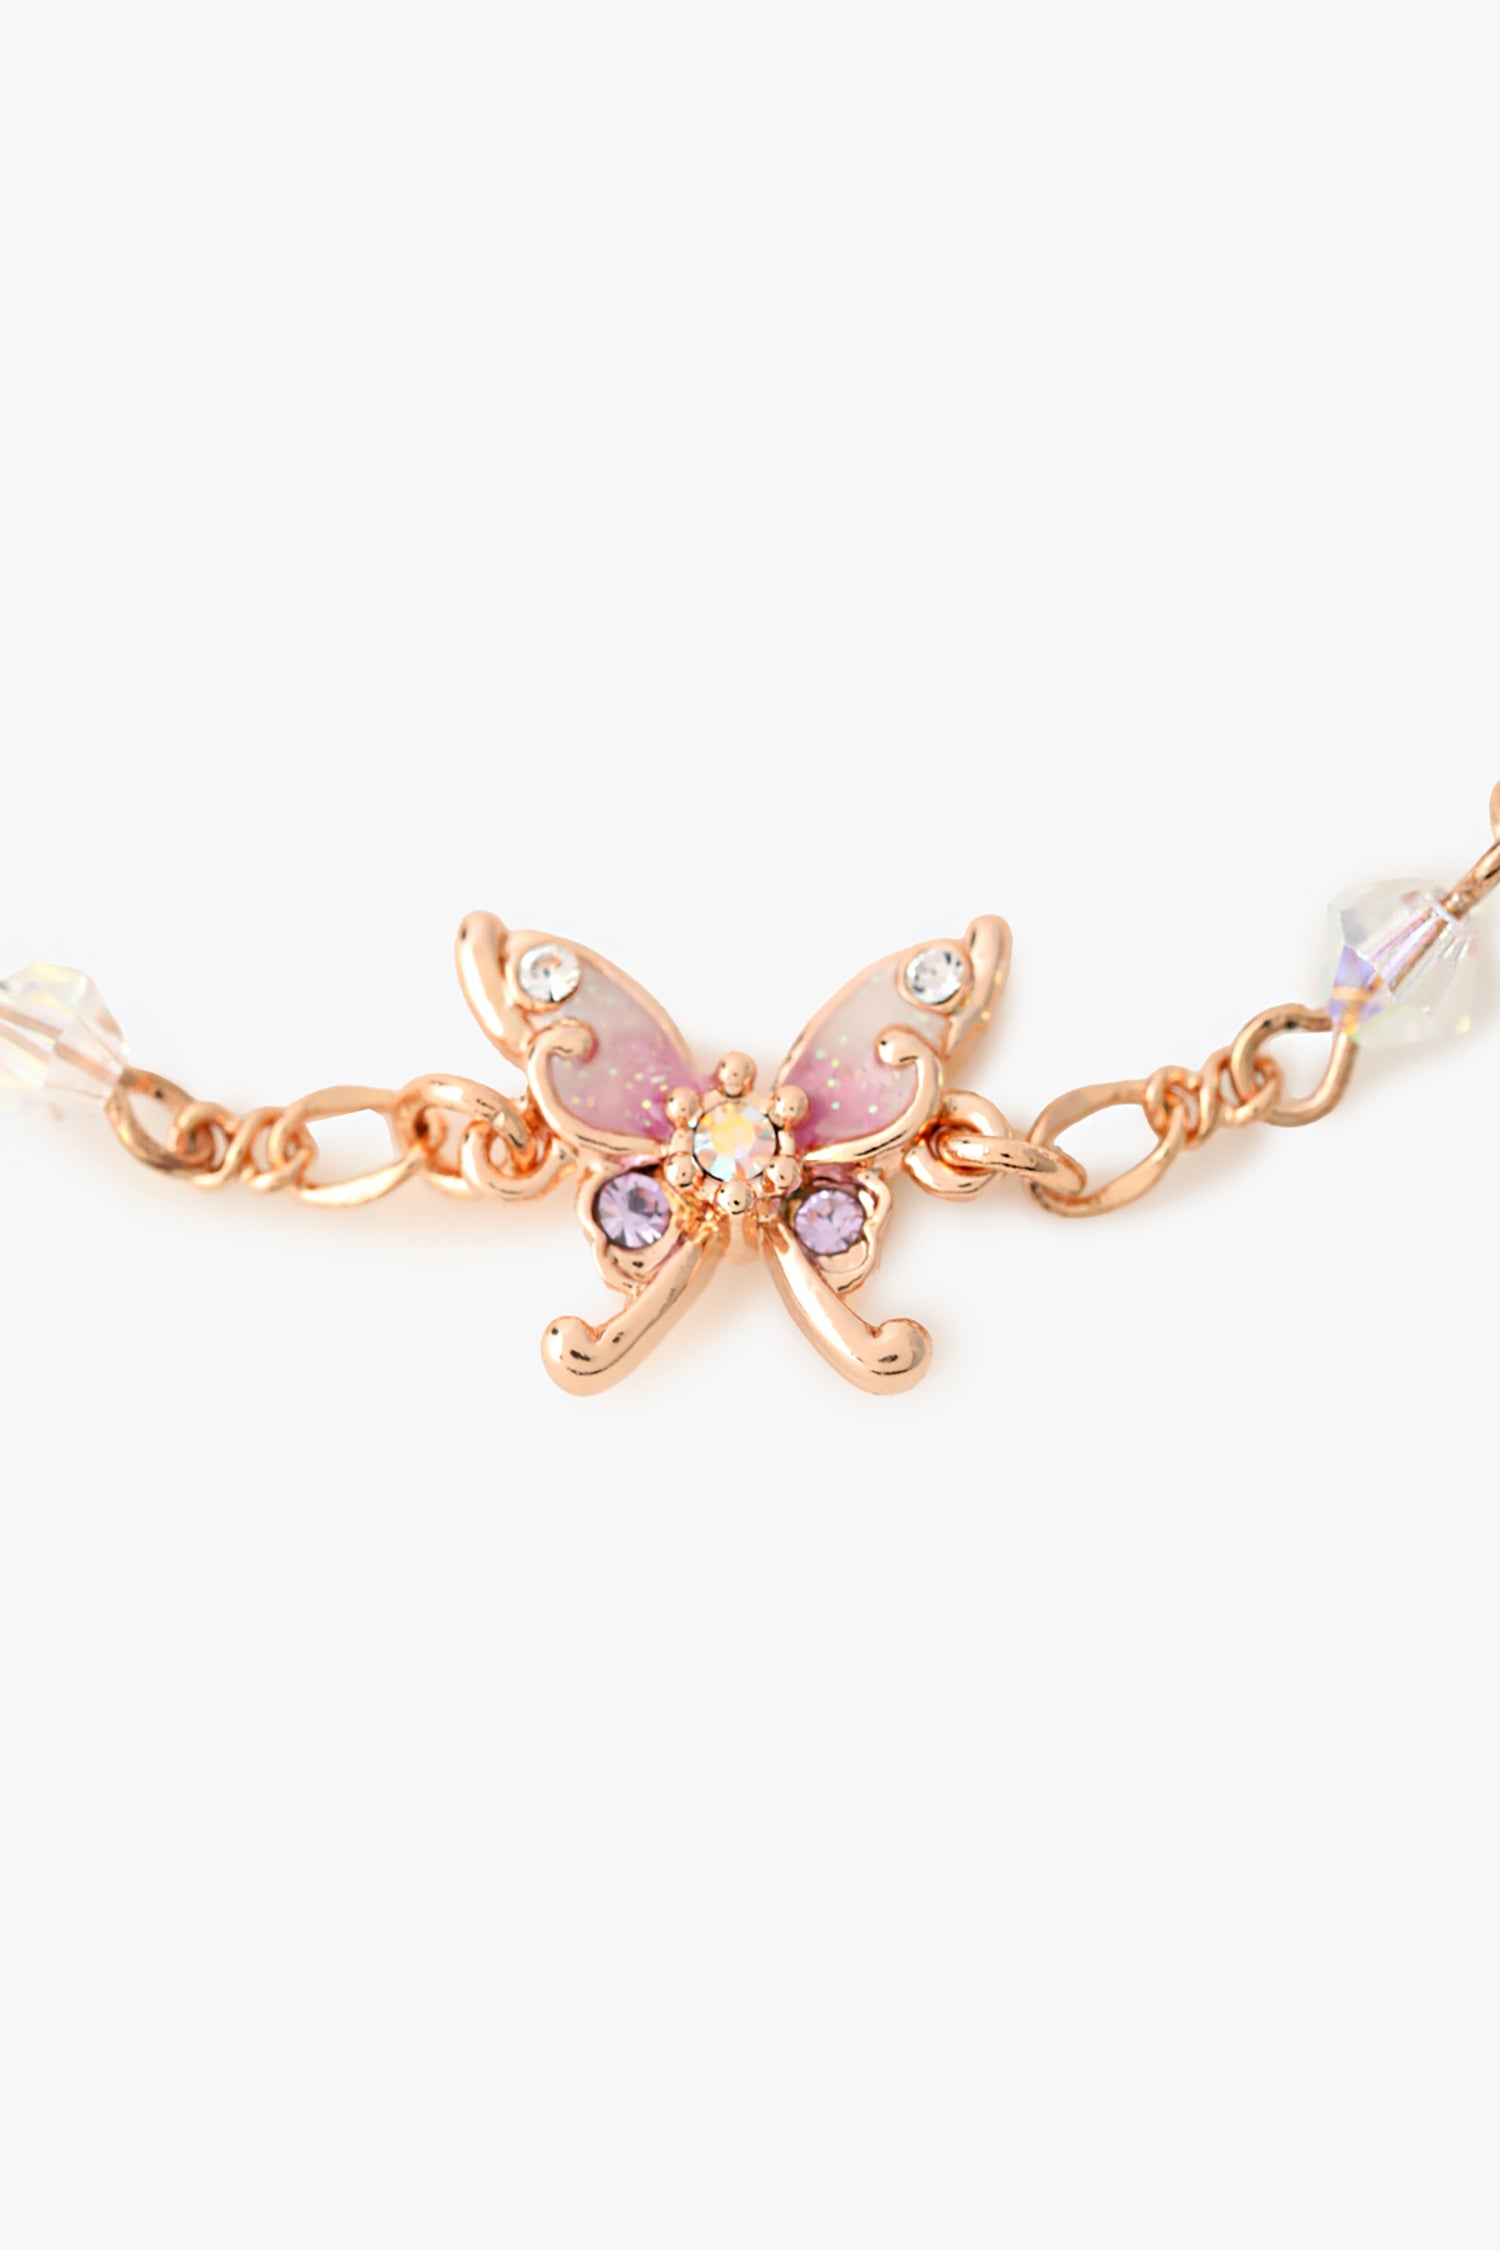 Bracelet, rose gold Toned Embellished with Purple Gems, and a Purple Butterfly Charm, large links